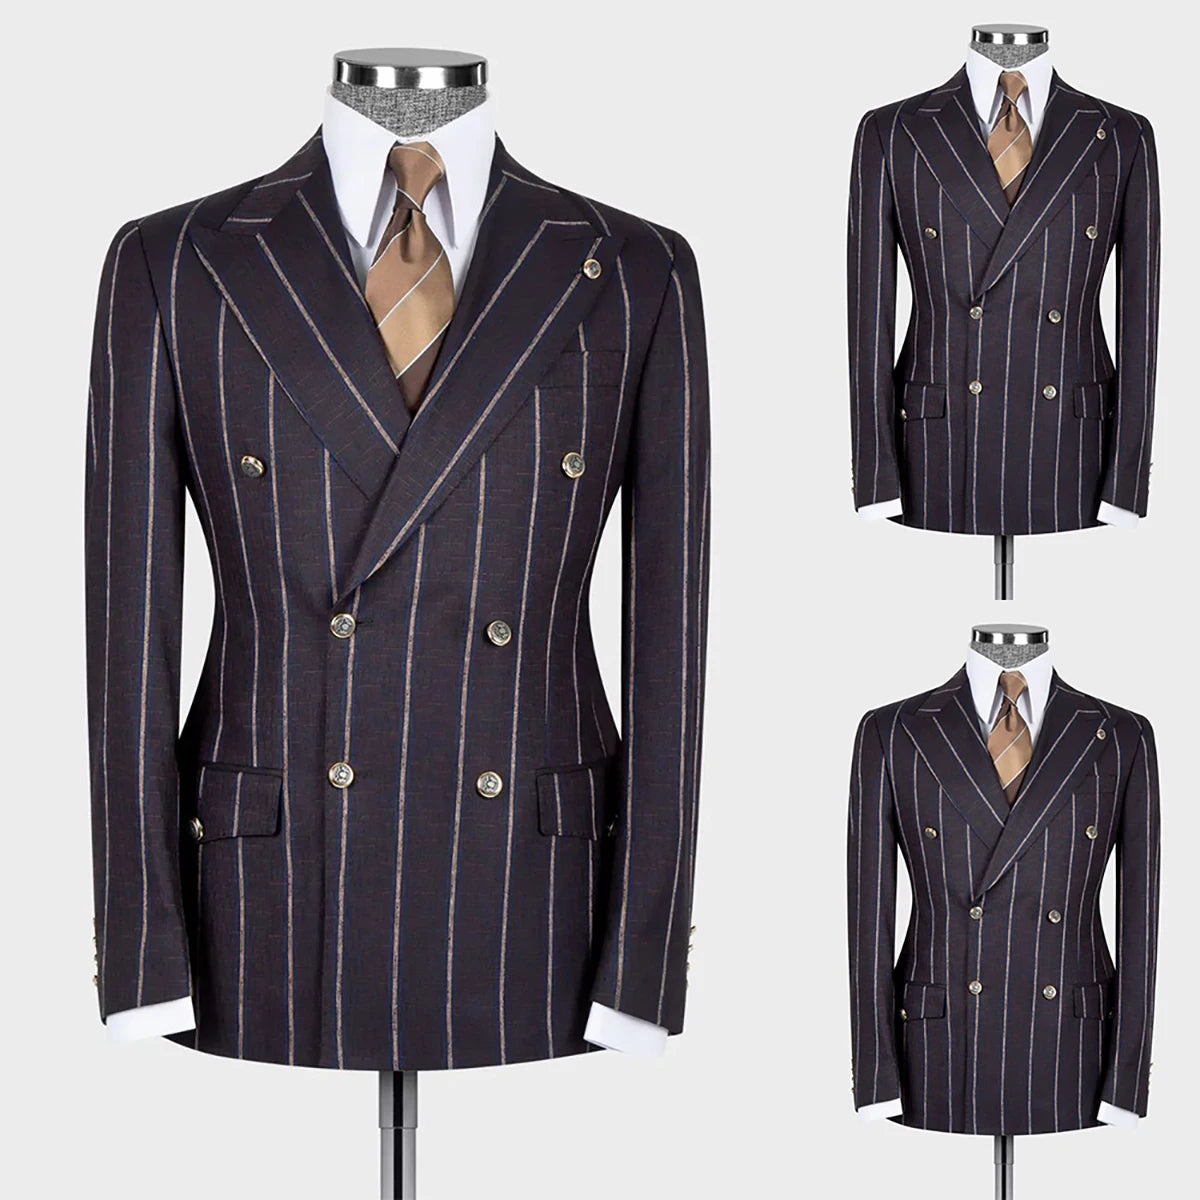 Black Stripes Men Suit Tailor-Made One Piece Men Blazer Tuxedo Double Breasted Formal Wedding Groom Business Prom Tailored